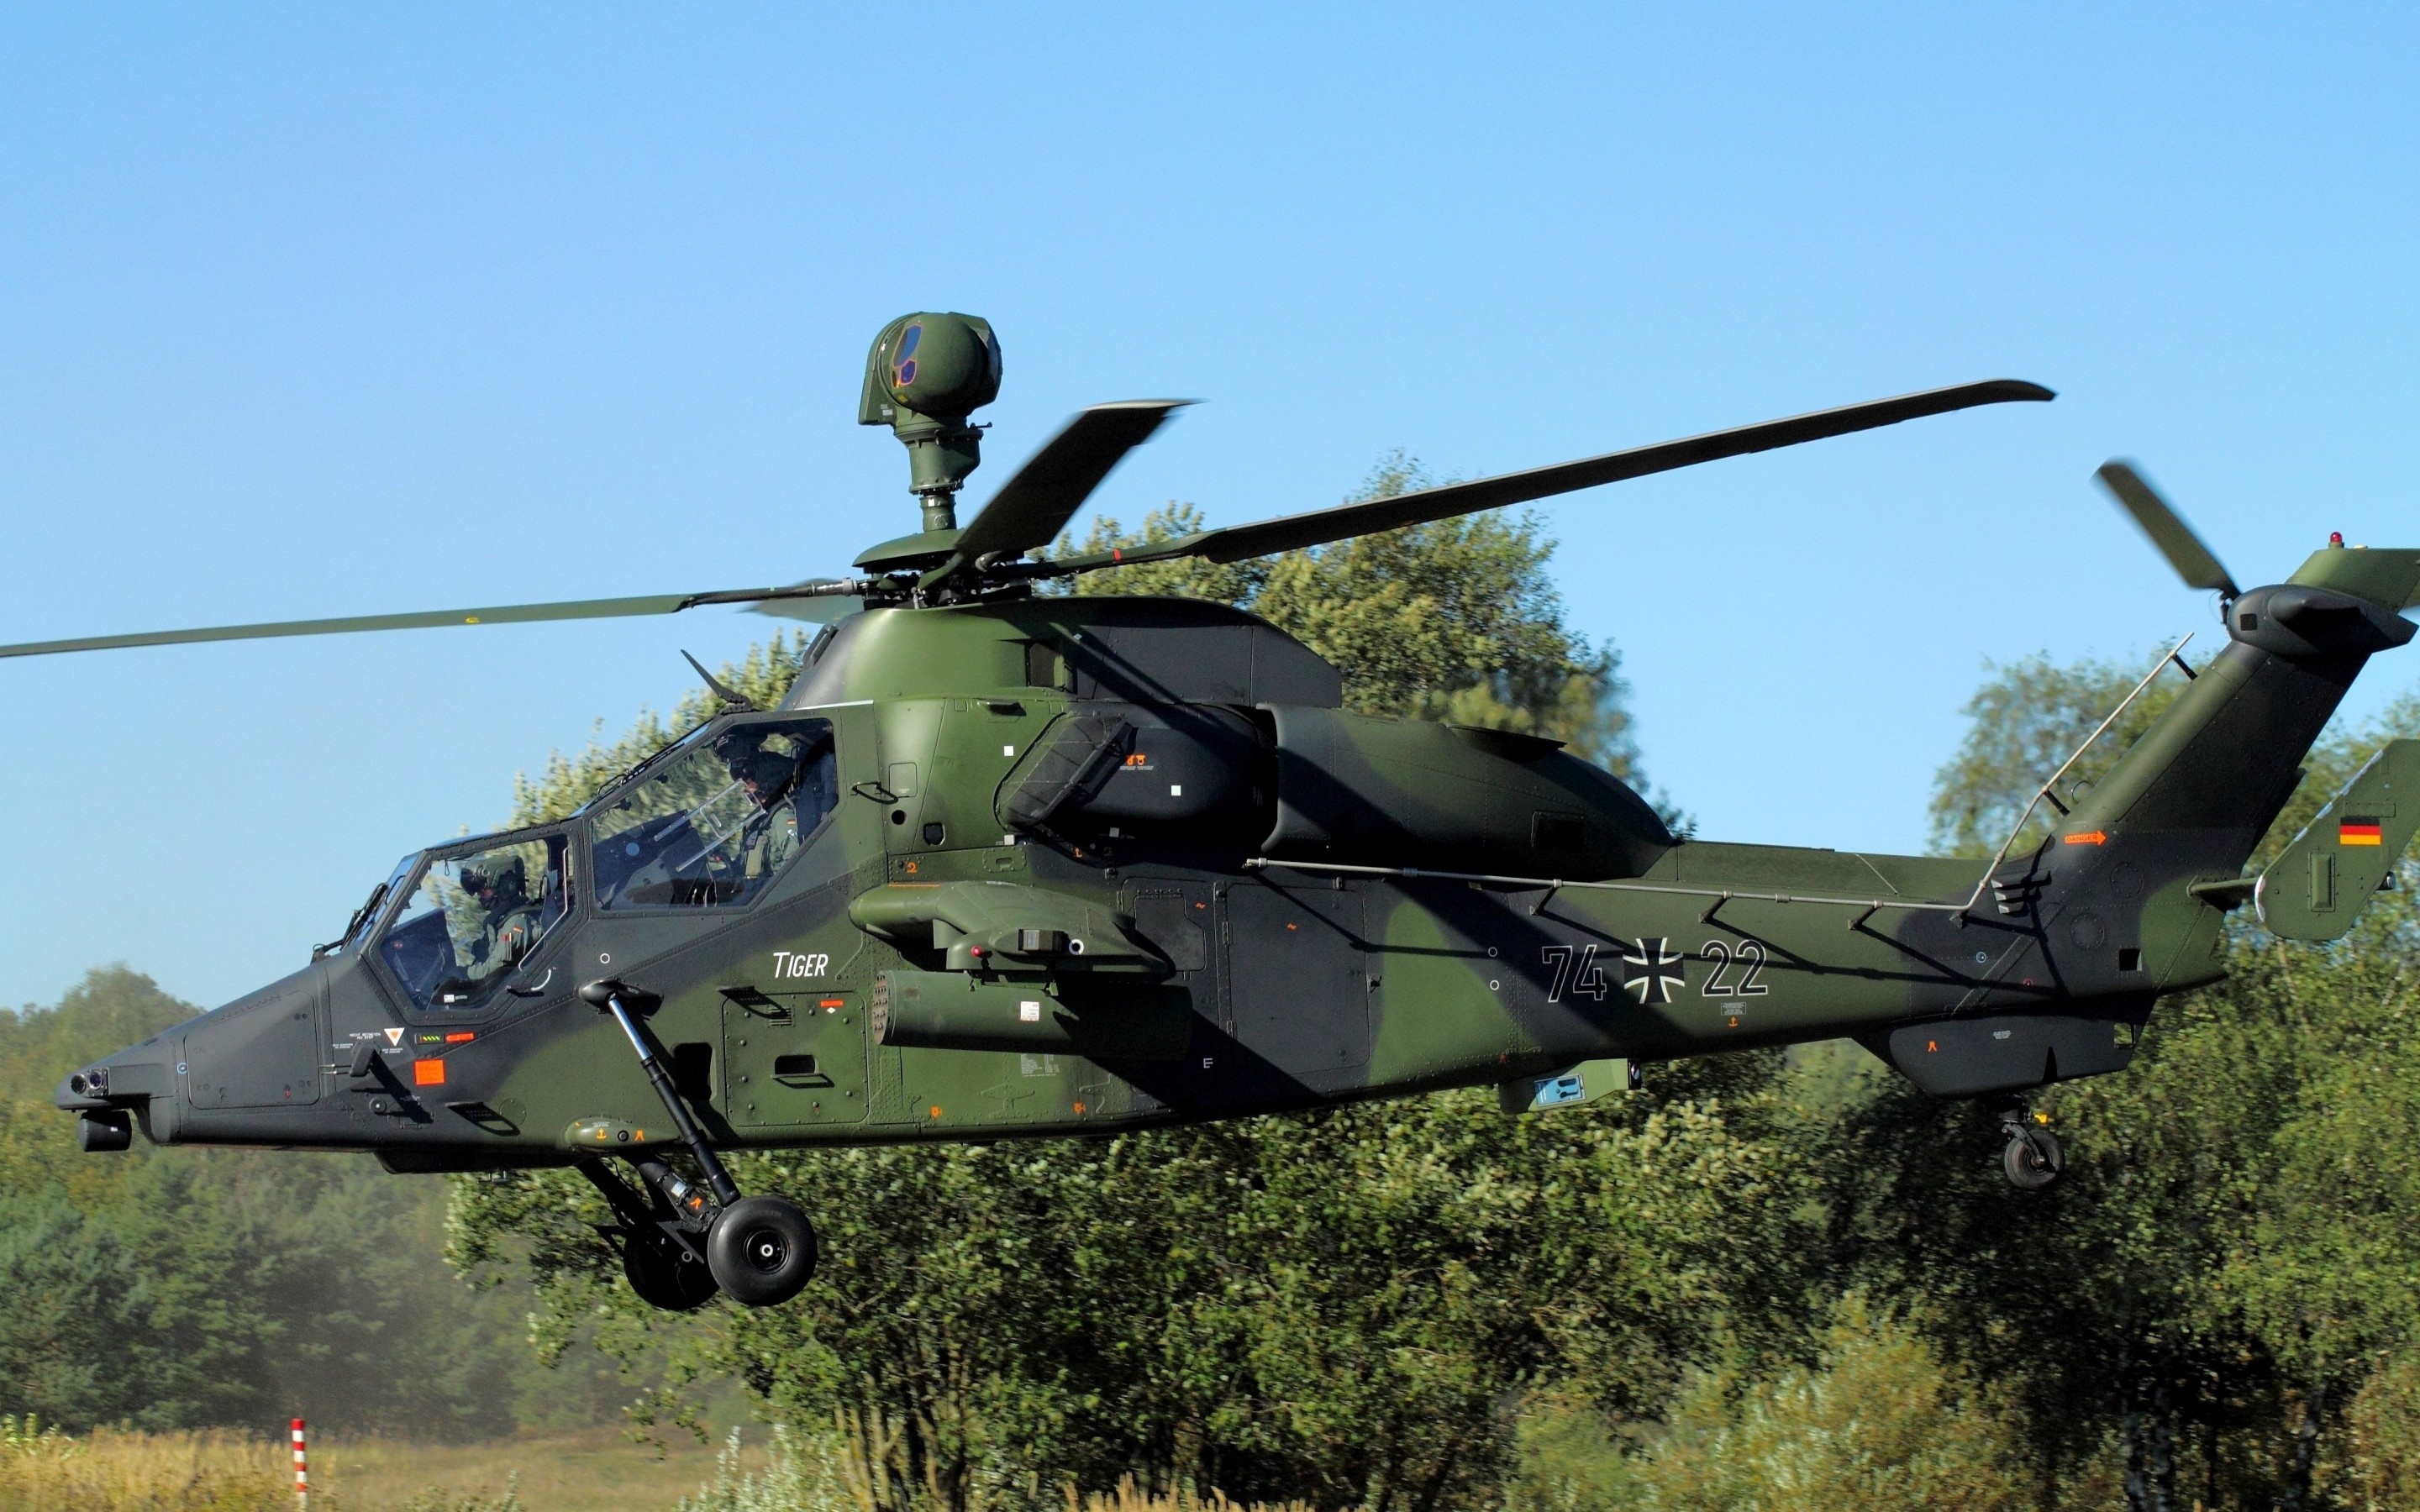 Wallpaper of the Eurocopter Tiger, perfect for car enthusiasts, 2880x1800 HD Desktop